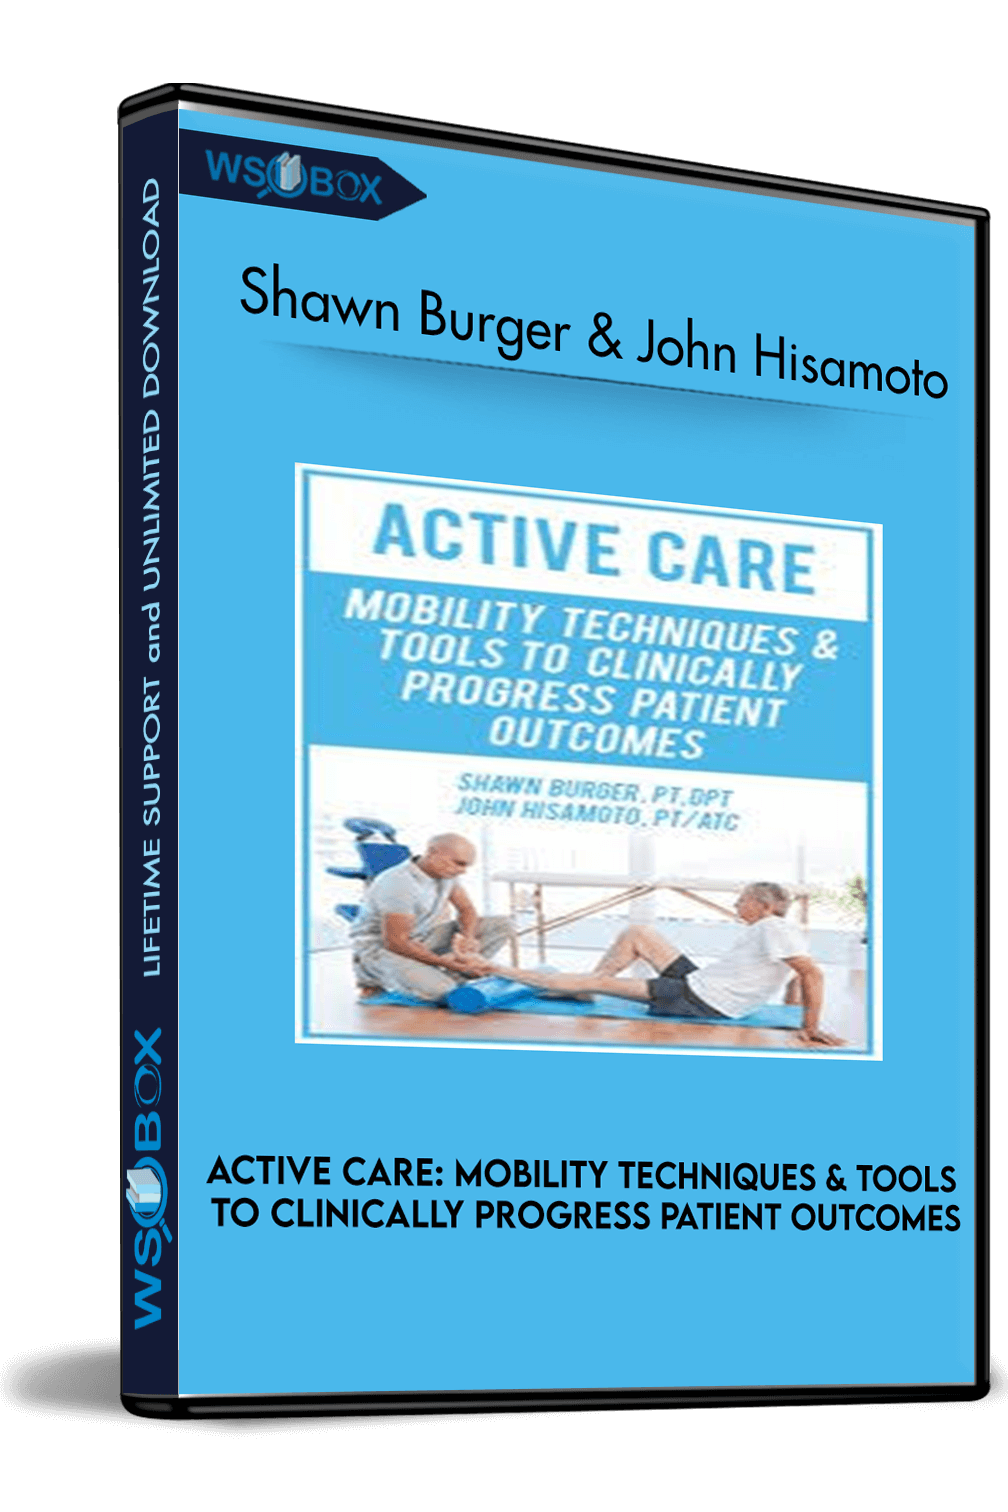 Active Care: Mobility Techniques & Tools to Clinically Progress Patient Outcomes – Shawn Burger & John Hisamoto